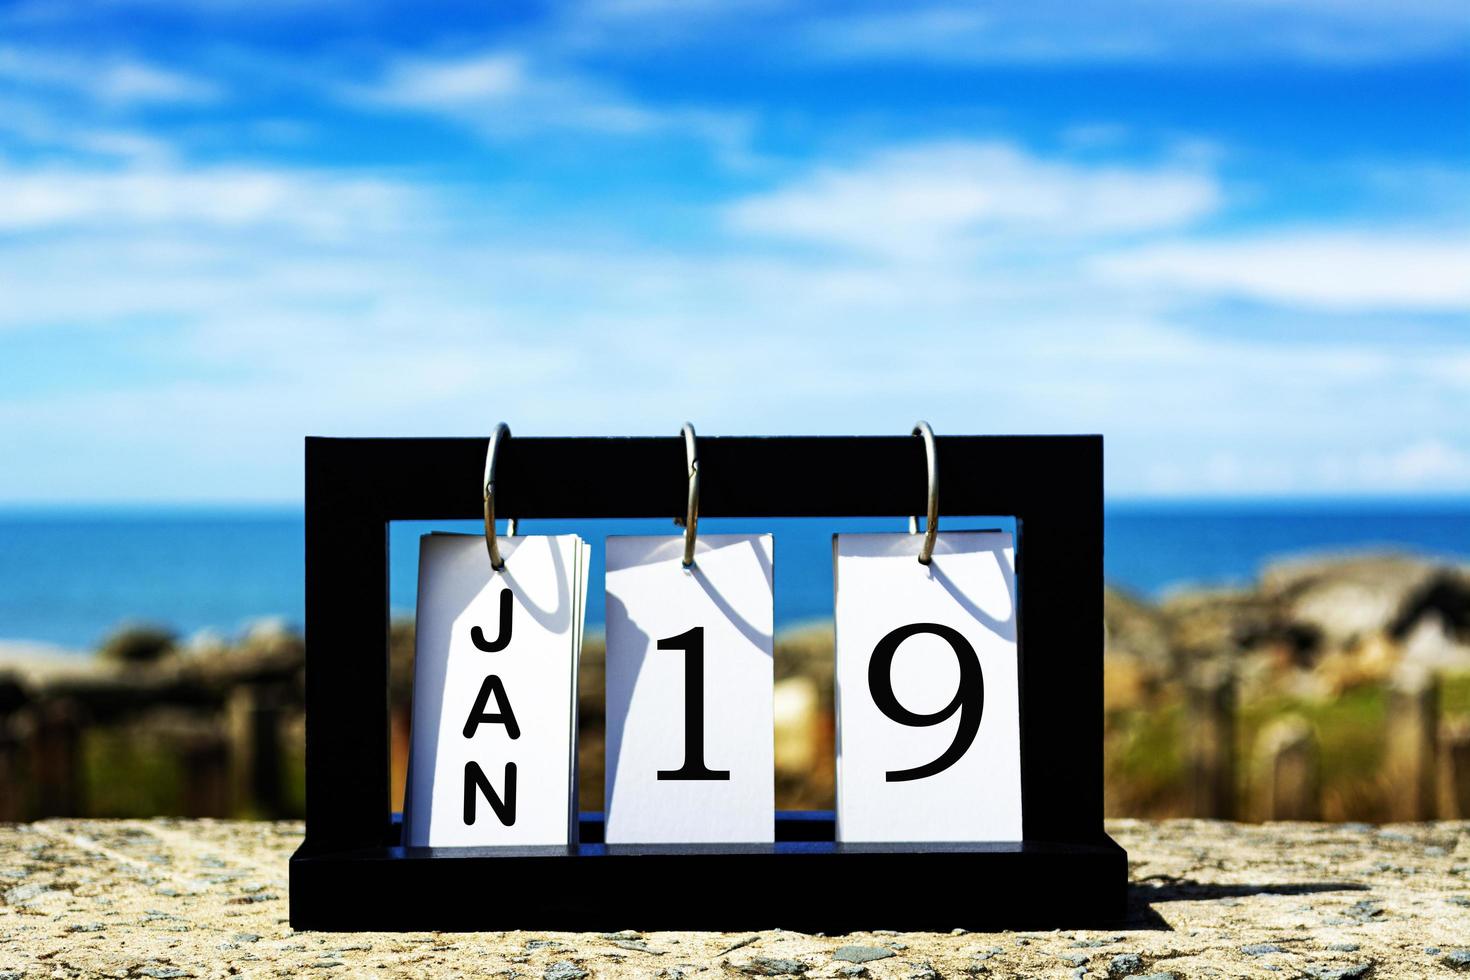 Jan 19 calendar date text on wooden frame with blurred background of ocean photo